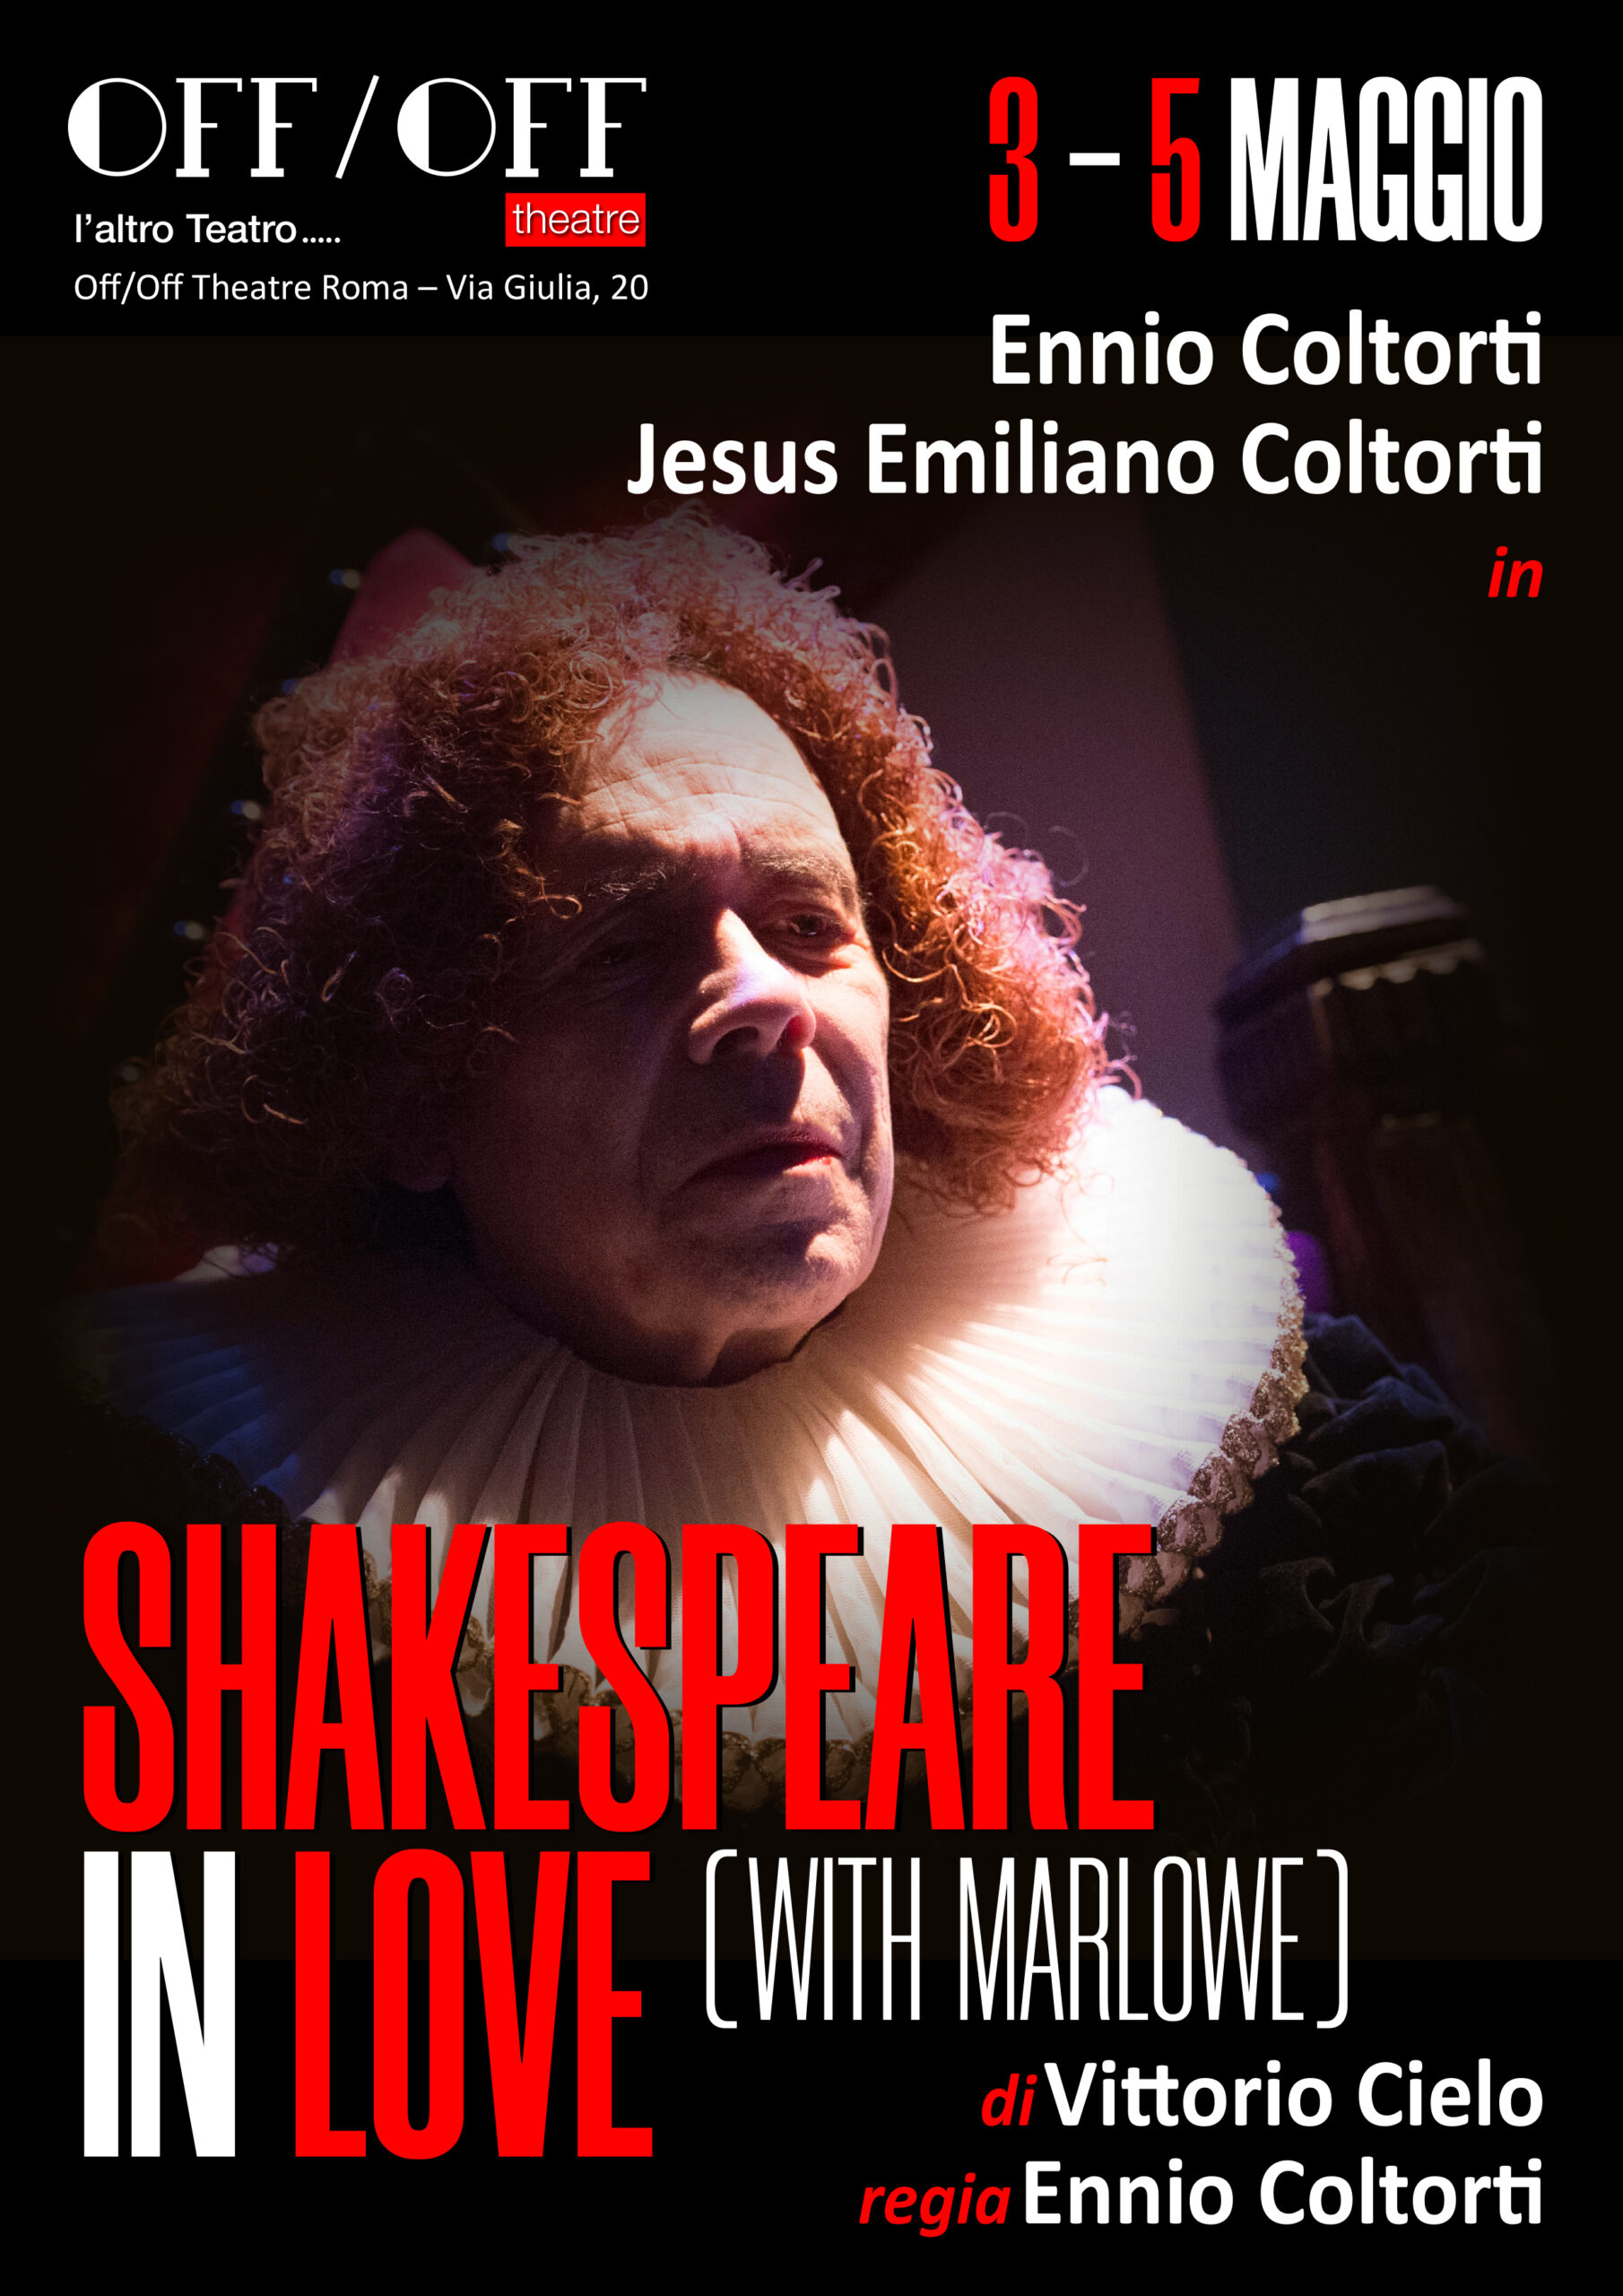 SHAKESPEARE IN LOVE WITH MARLOWE